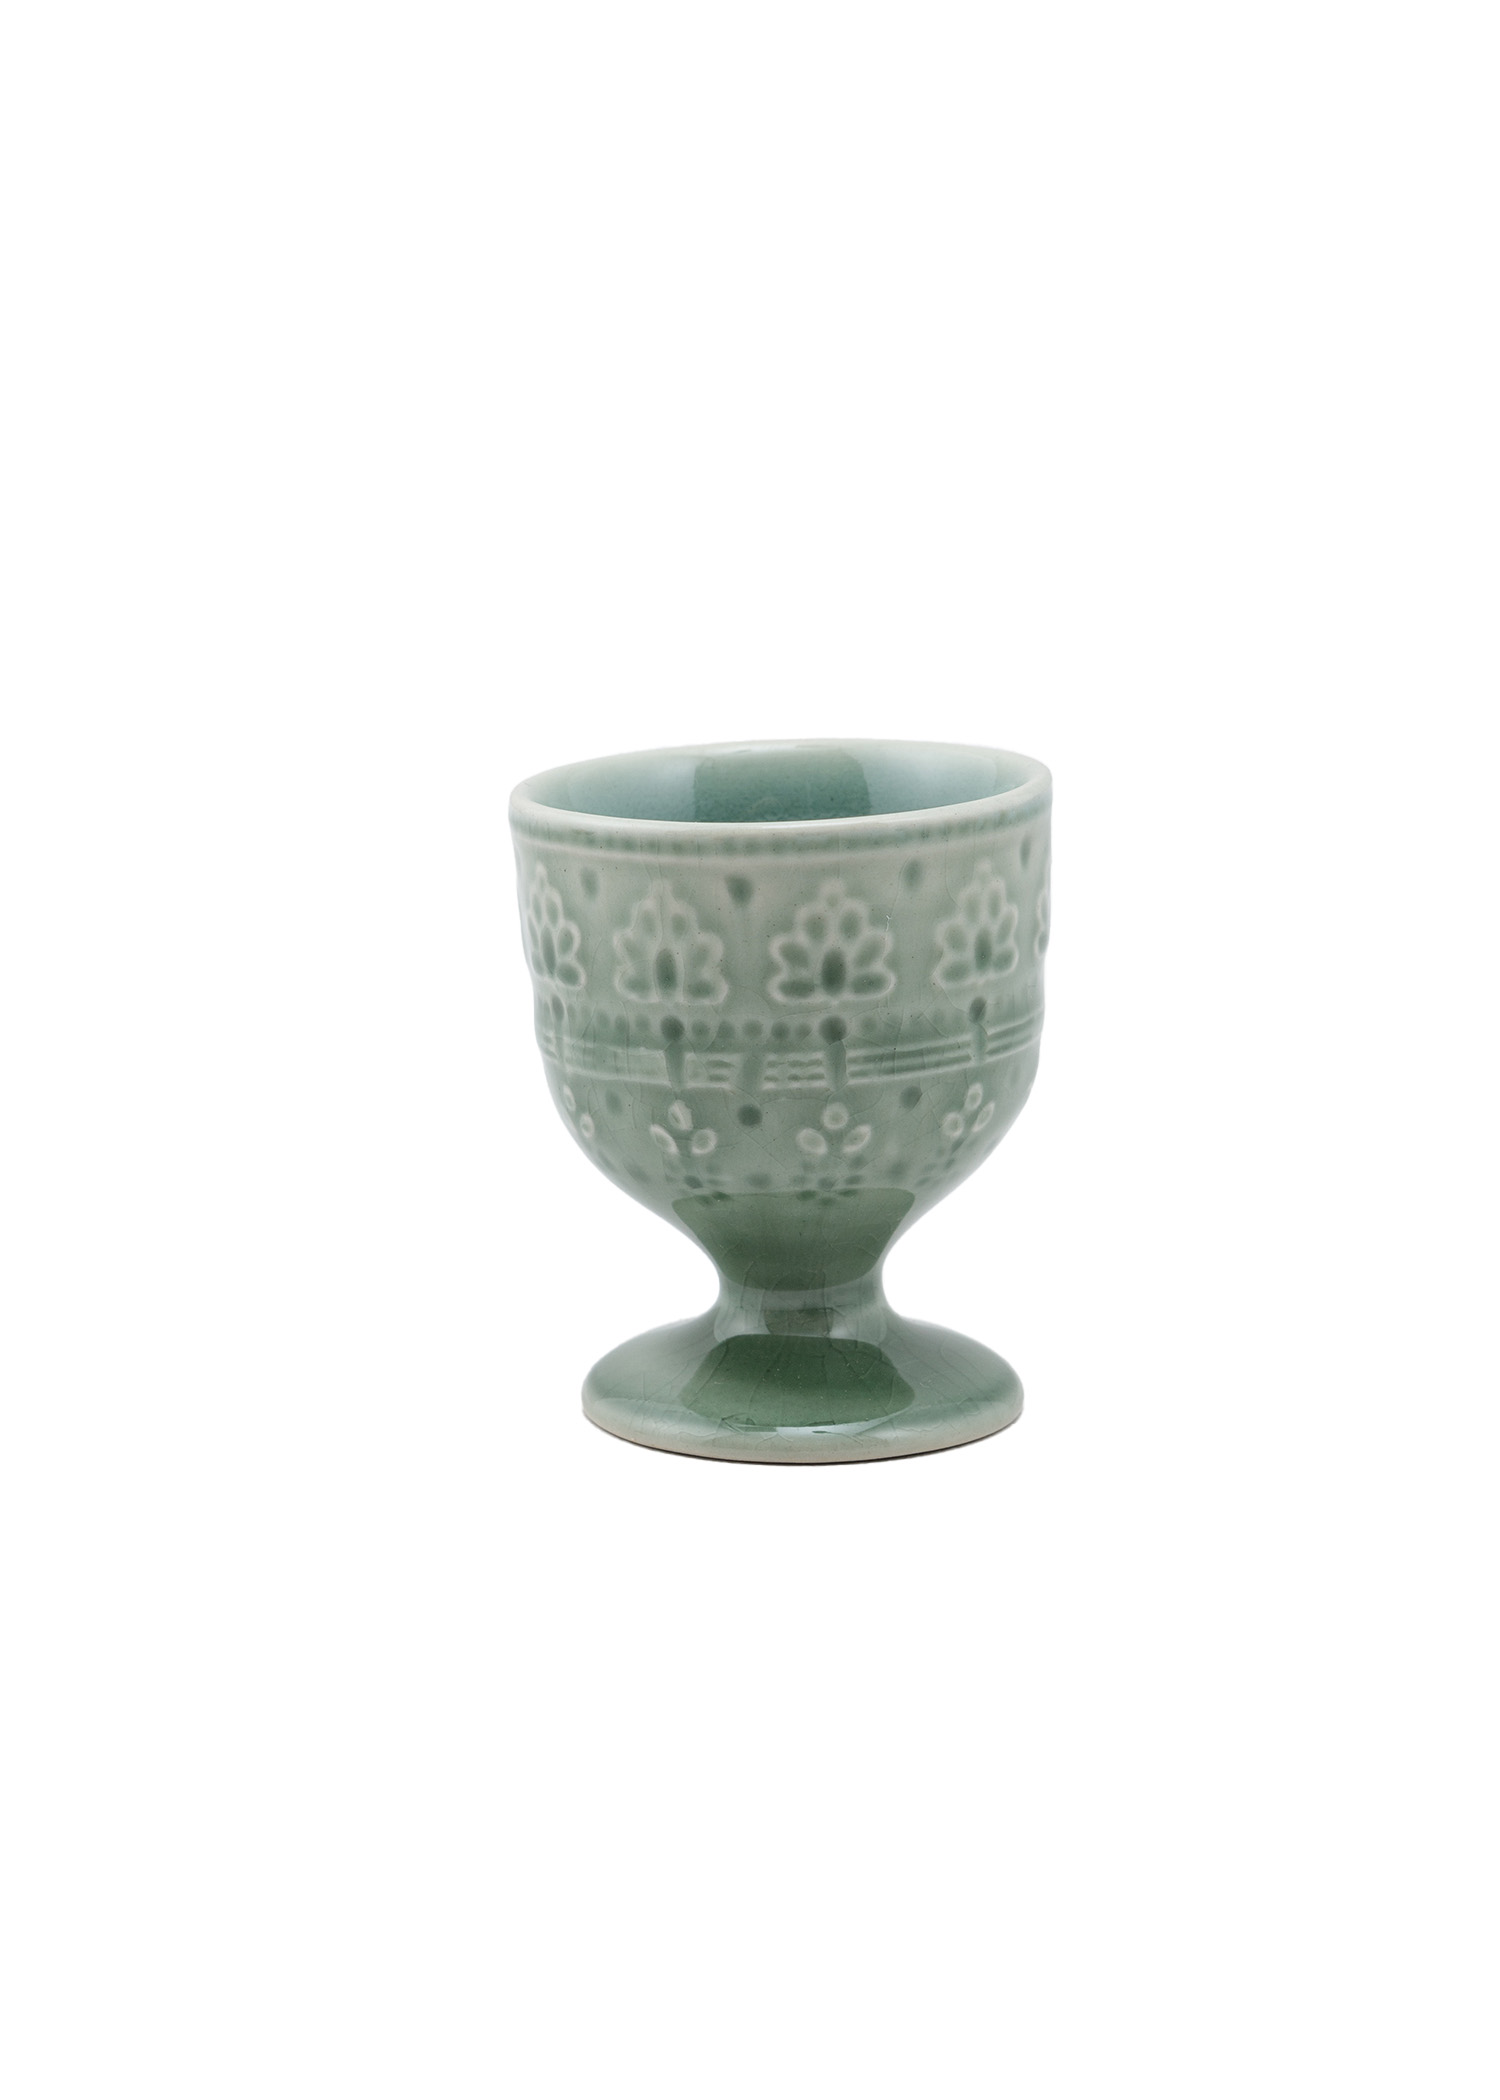 Stoneware egg cup Image 0